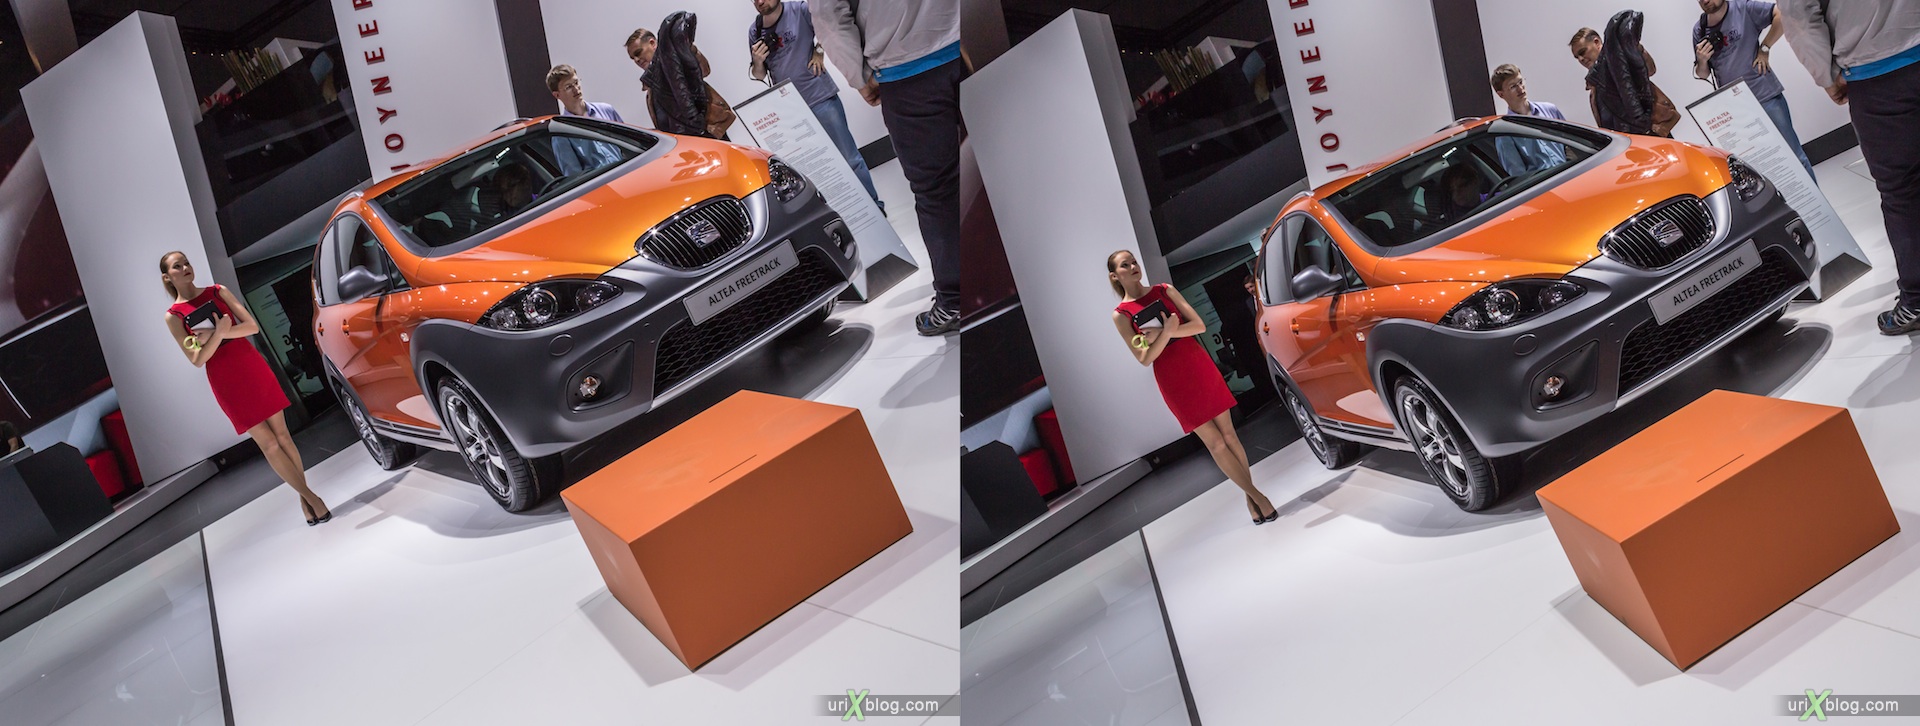 2012, Seat Altea Freetrack, girl, model, Moscow International Automobile Salon, auto show, 3D, stereo pair, cross-eyed, crossview